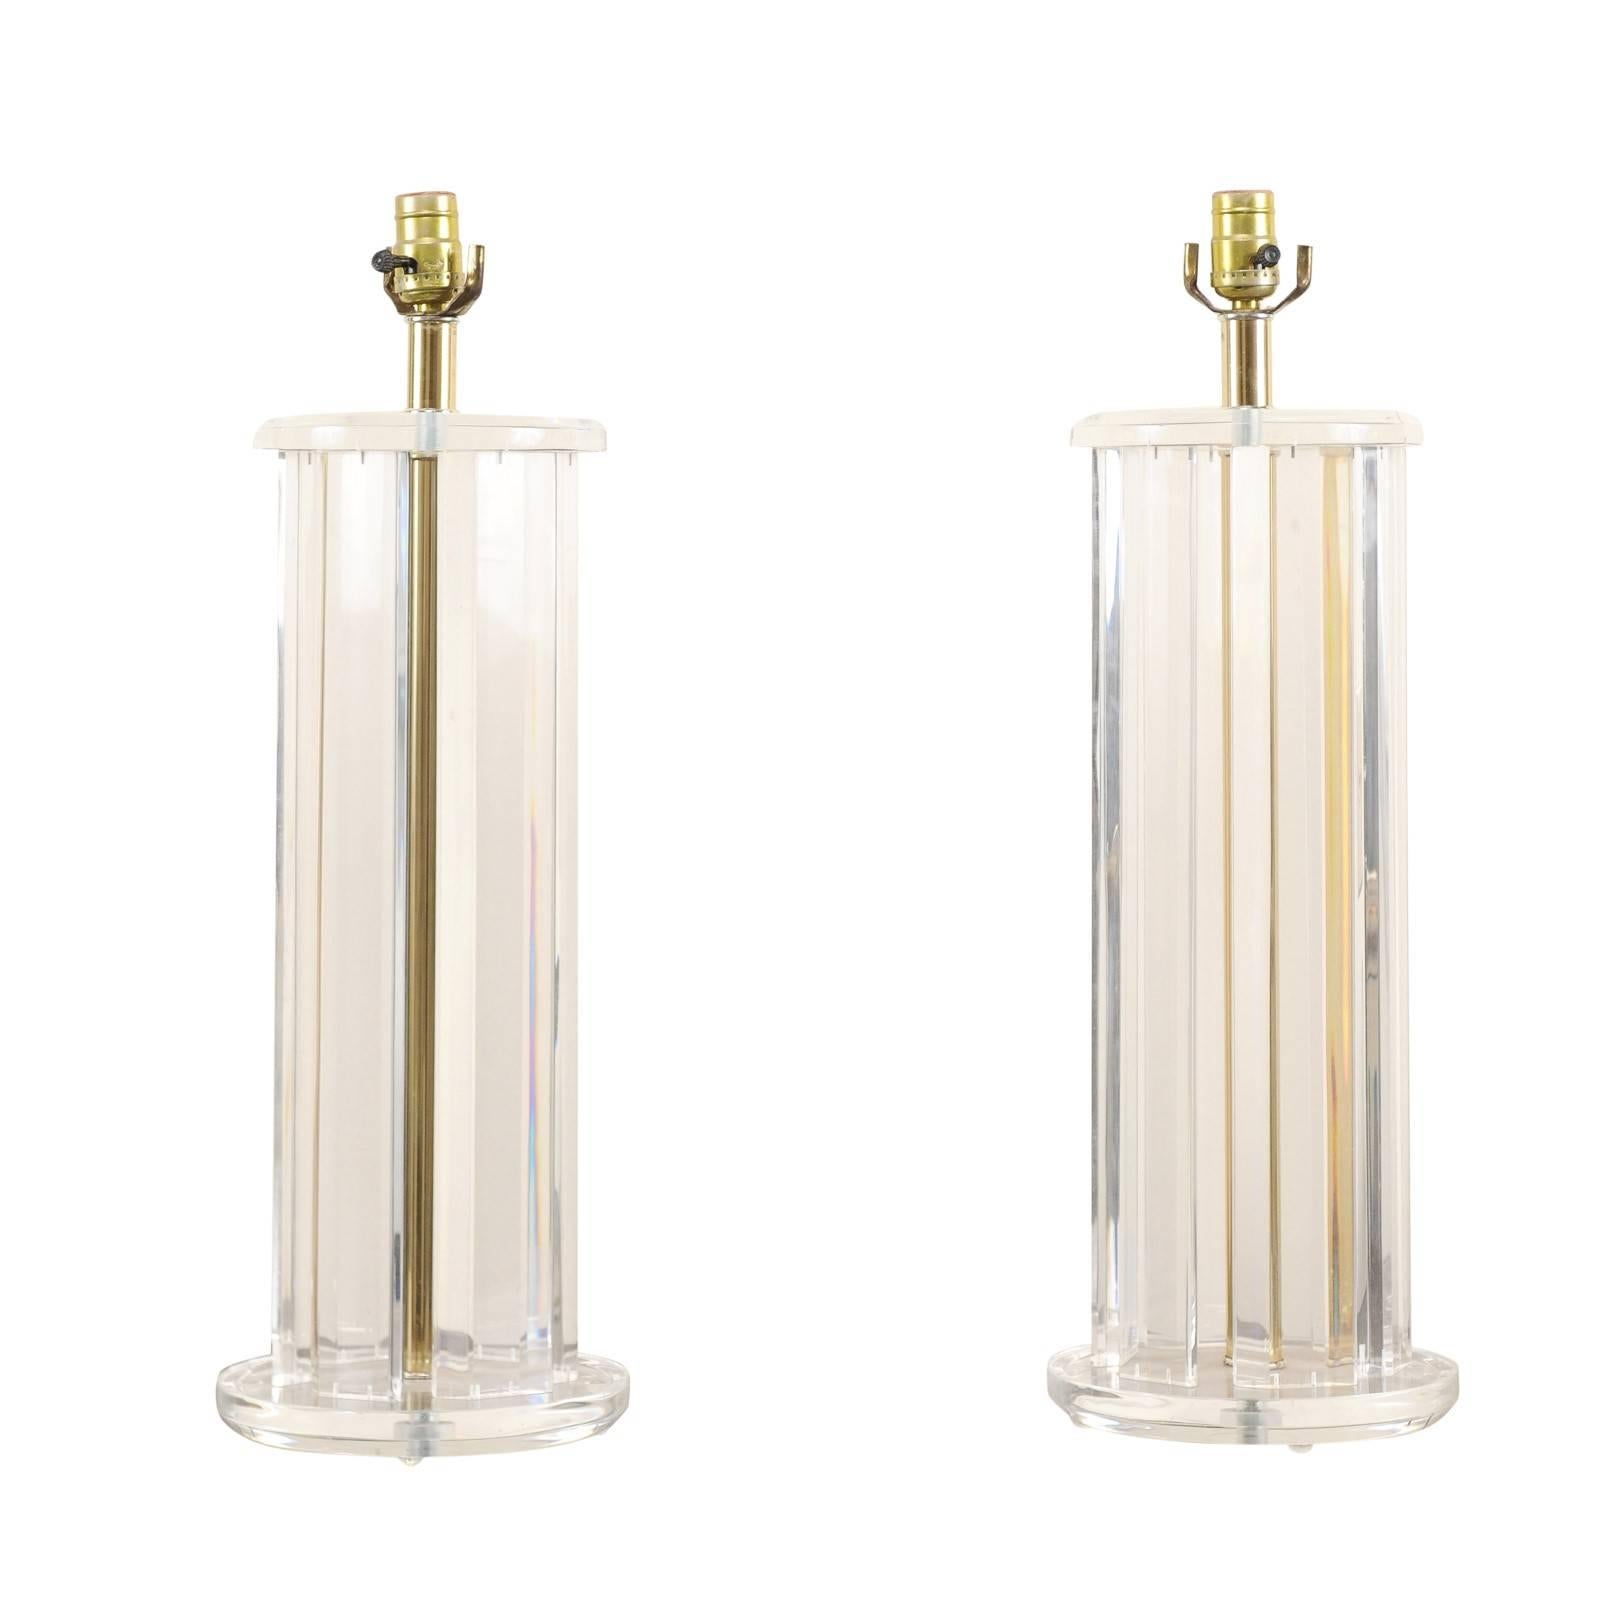 Pair of Lucite Mid-20th Century Table Lamps with Round Shape and Gold Tones